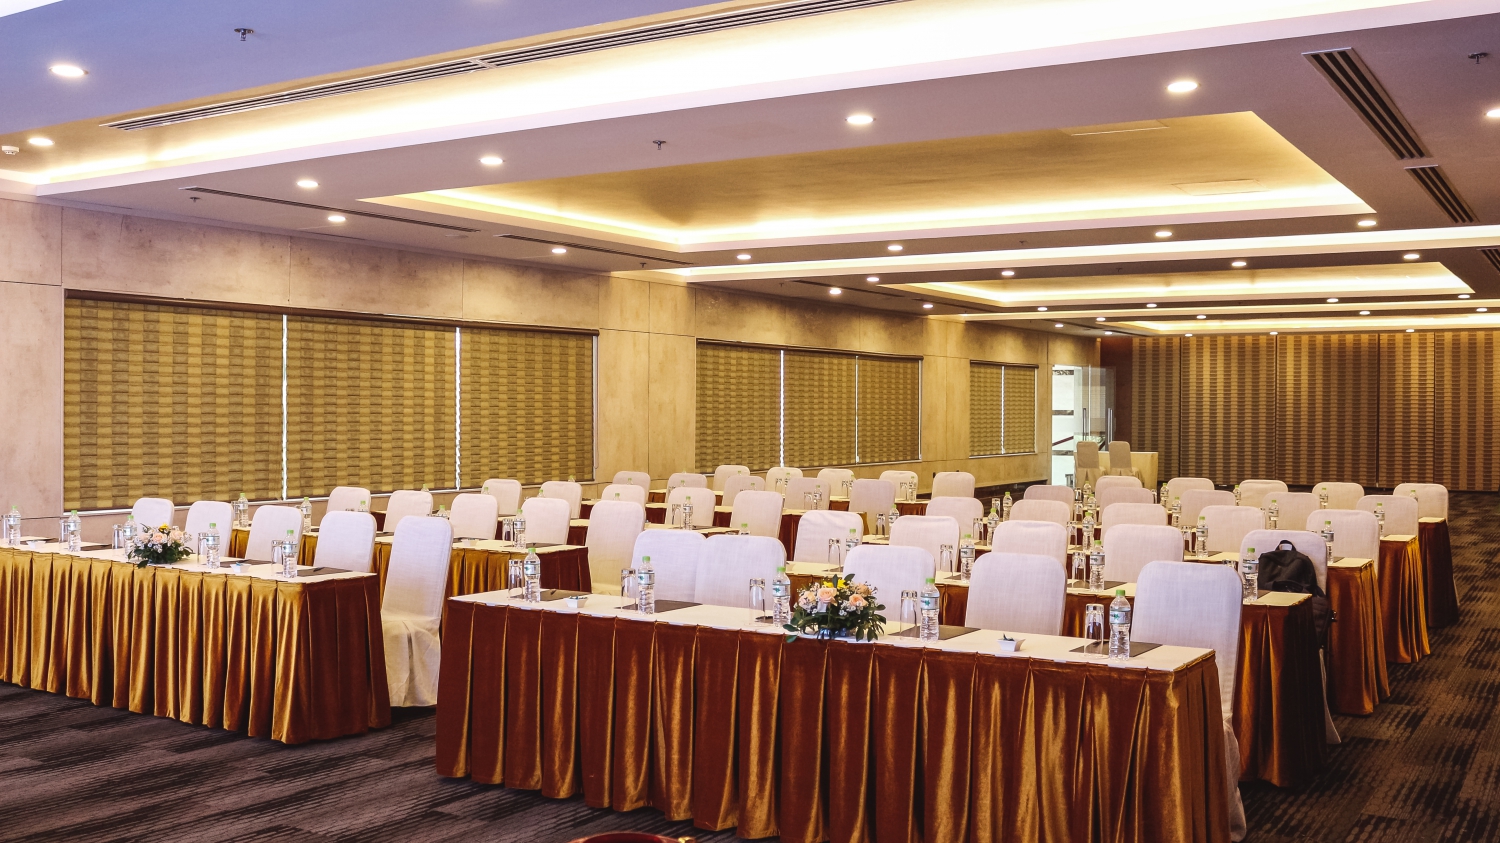 CONTEMPORARY MEETING ROOMS